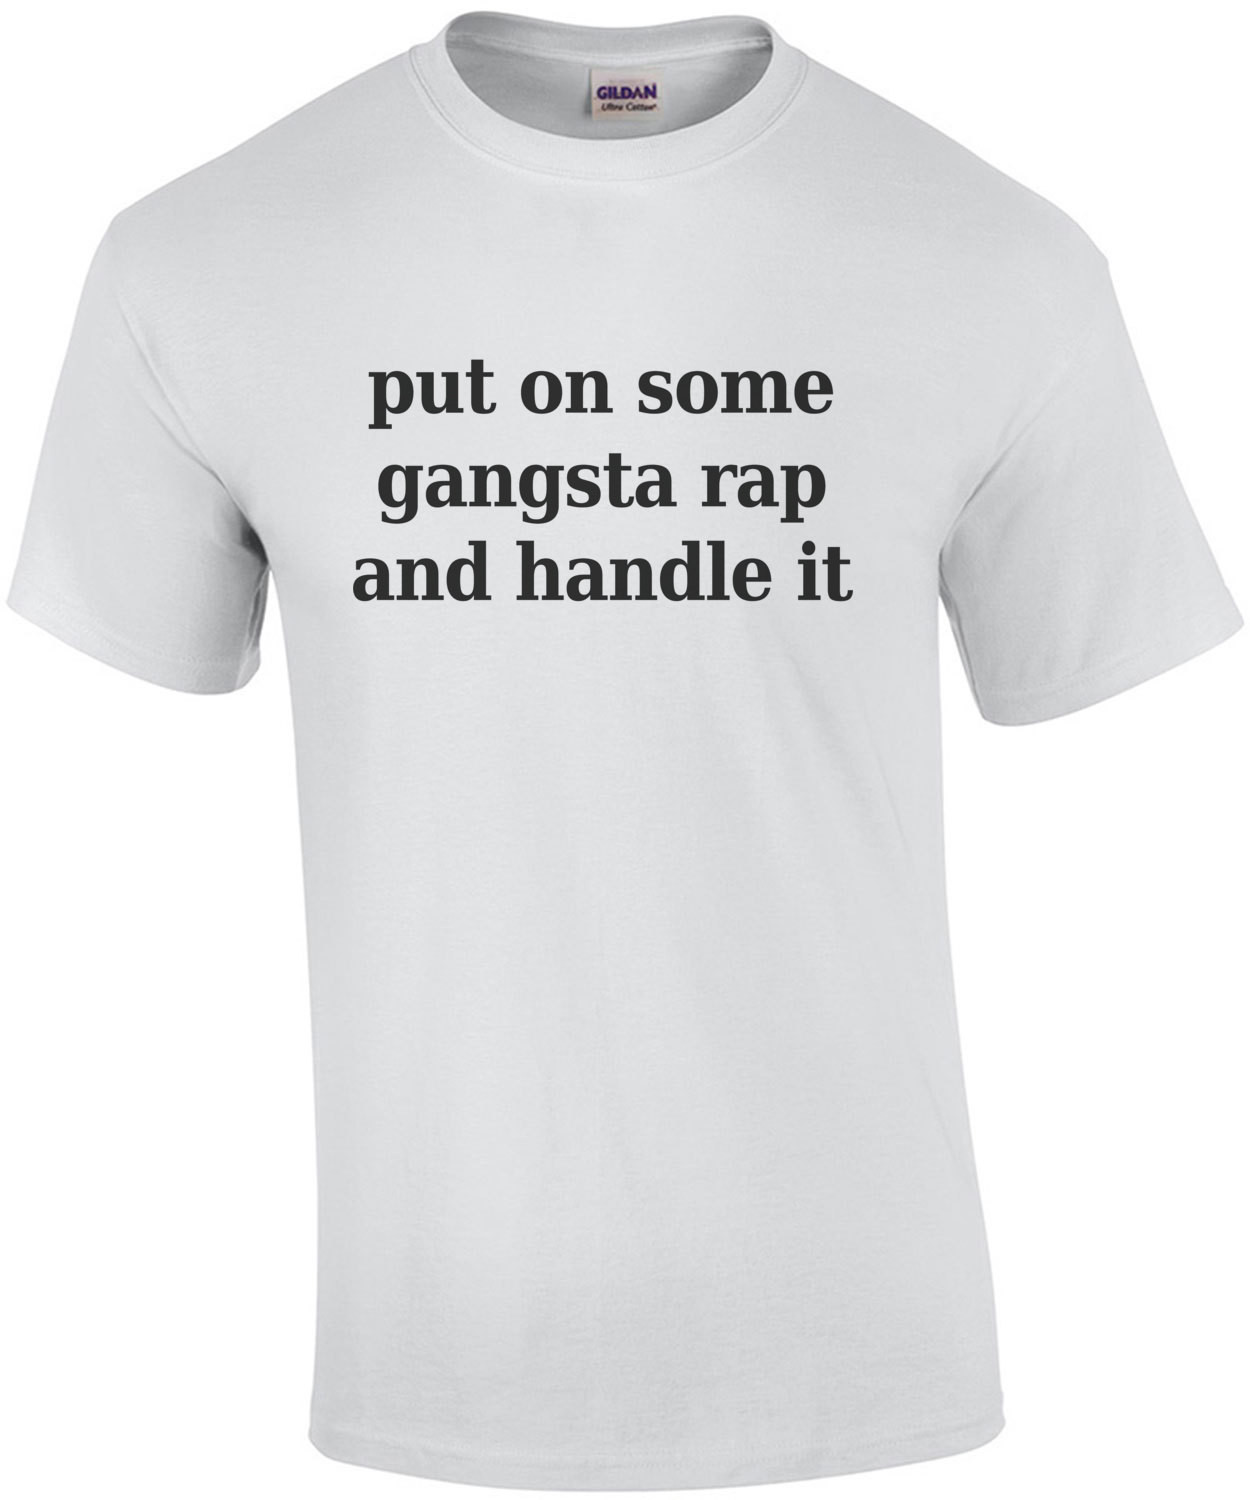 Put on some gangsta rap and handle it - funny t-shirt